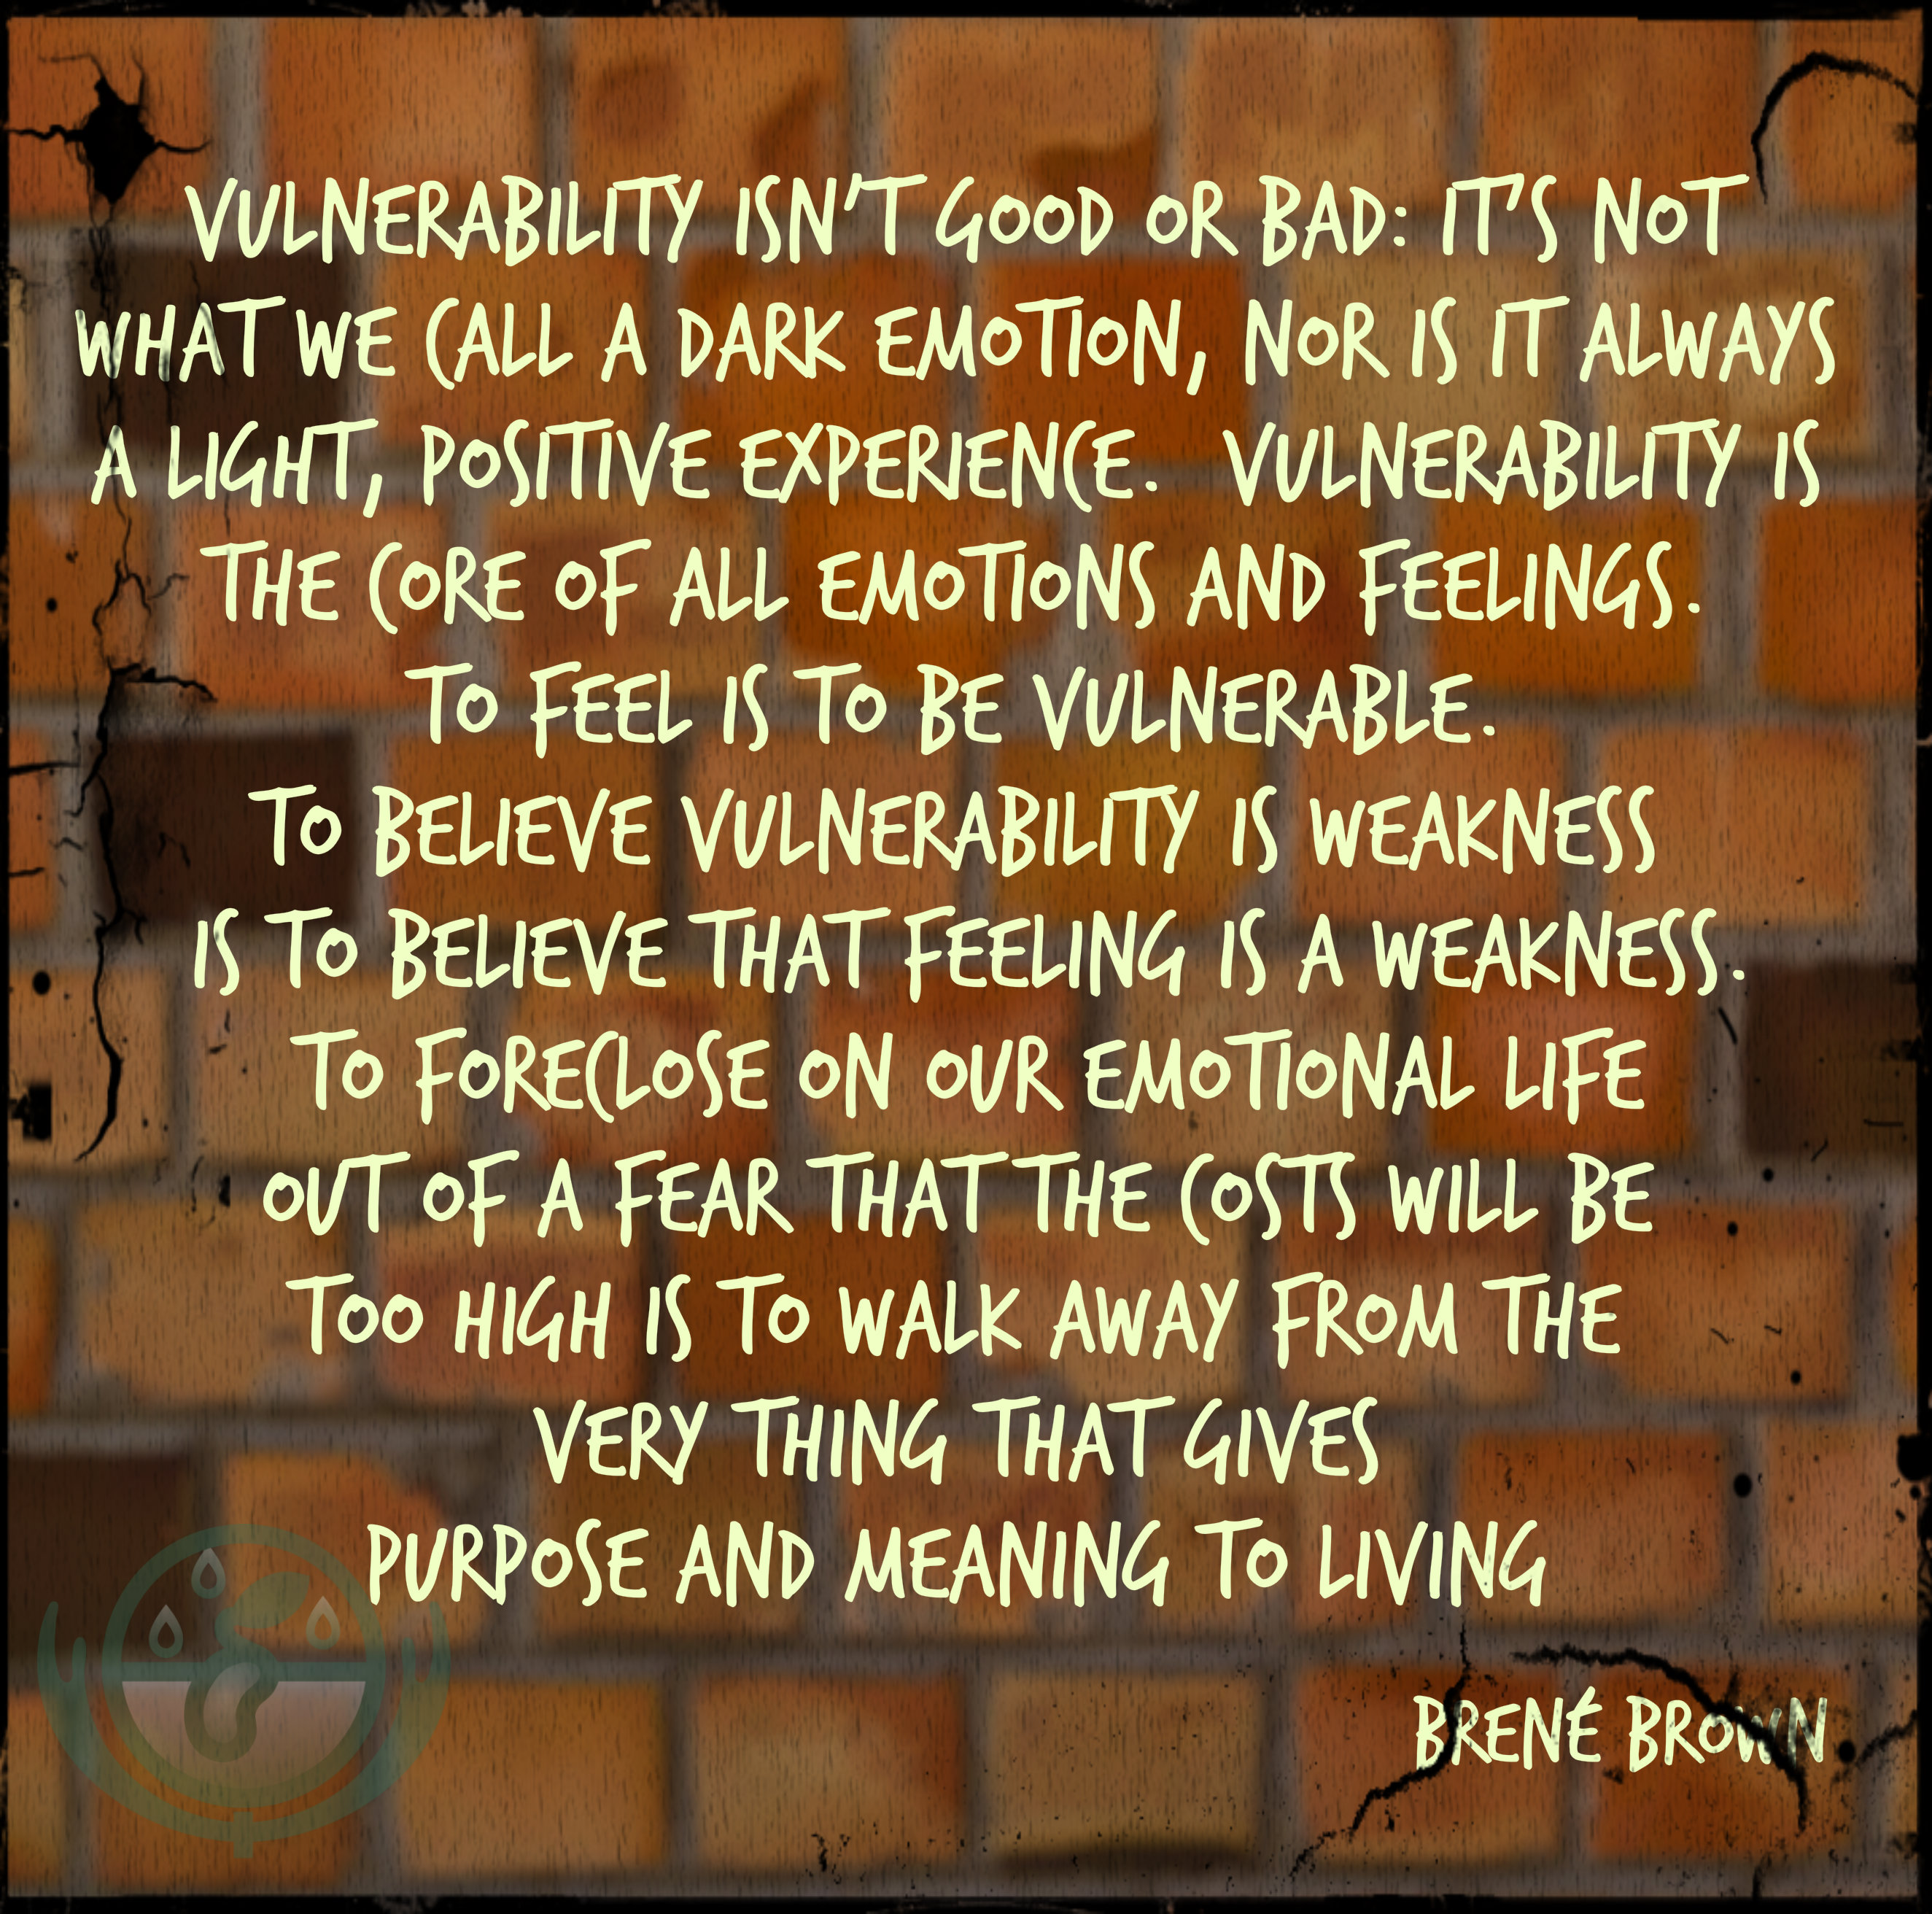 To feel is to be vulnerable. A Quote by Brene Brown